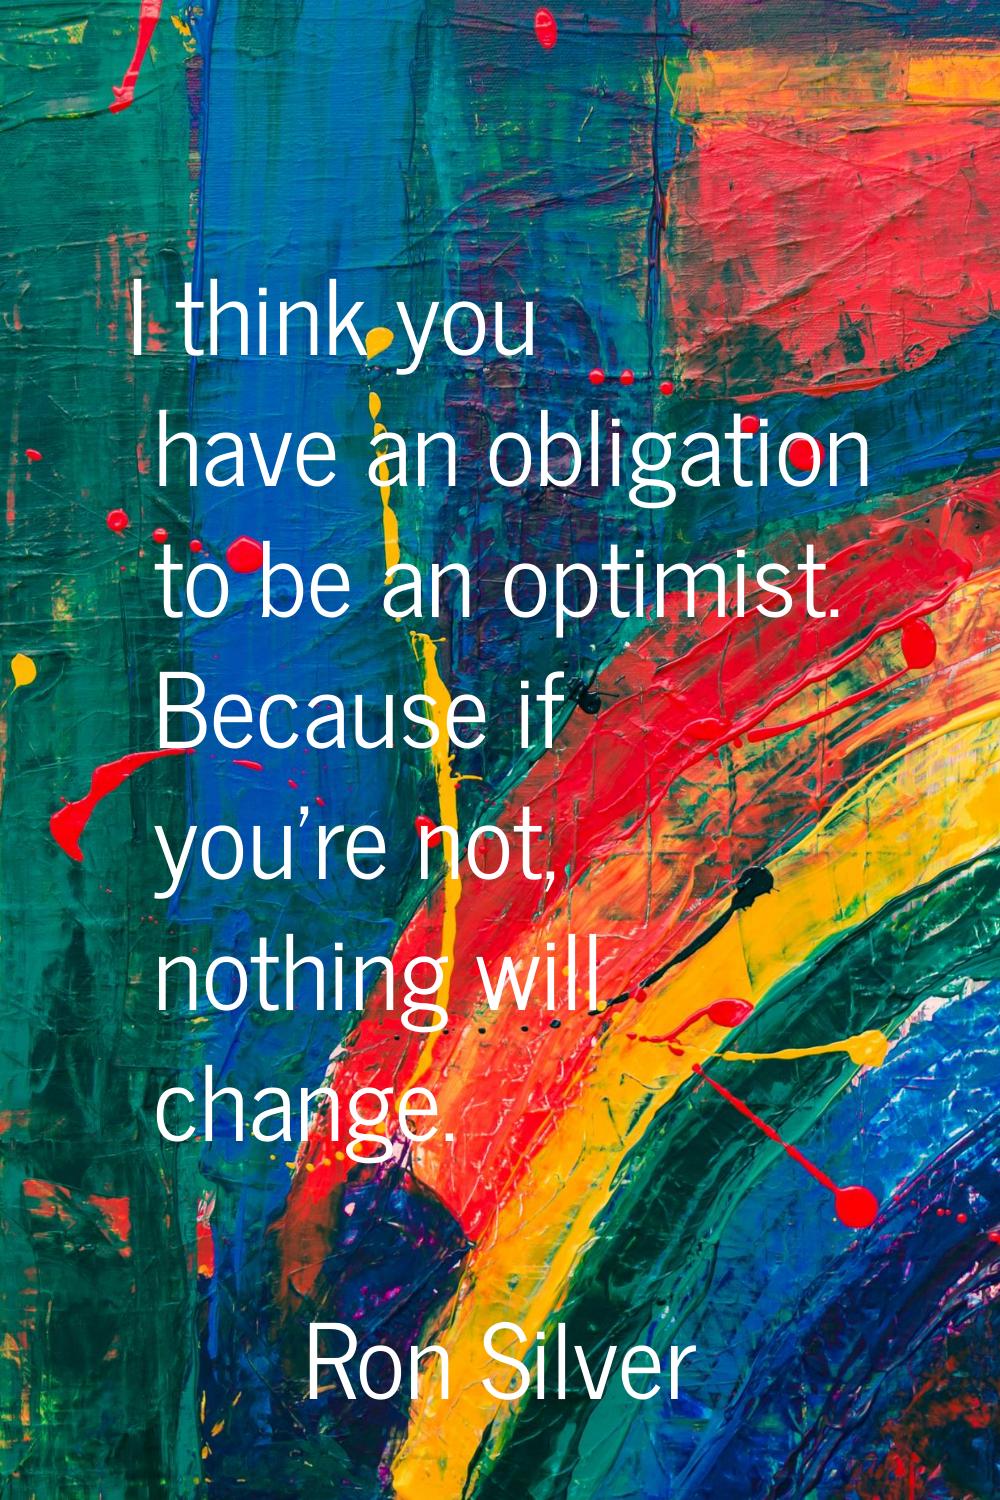 I think you have an obligation to be an optimist. Because if you're not, nothing will change.